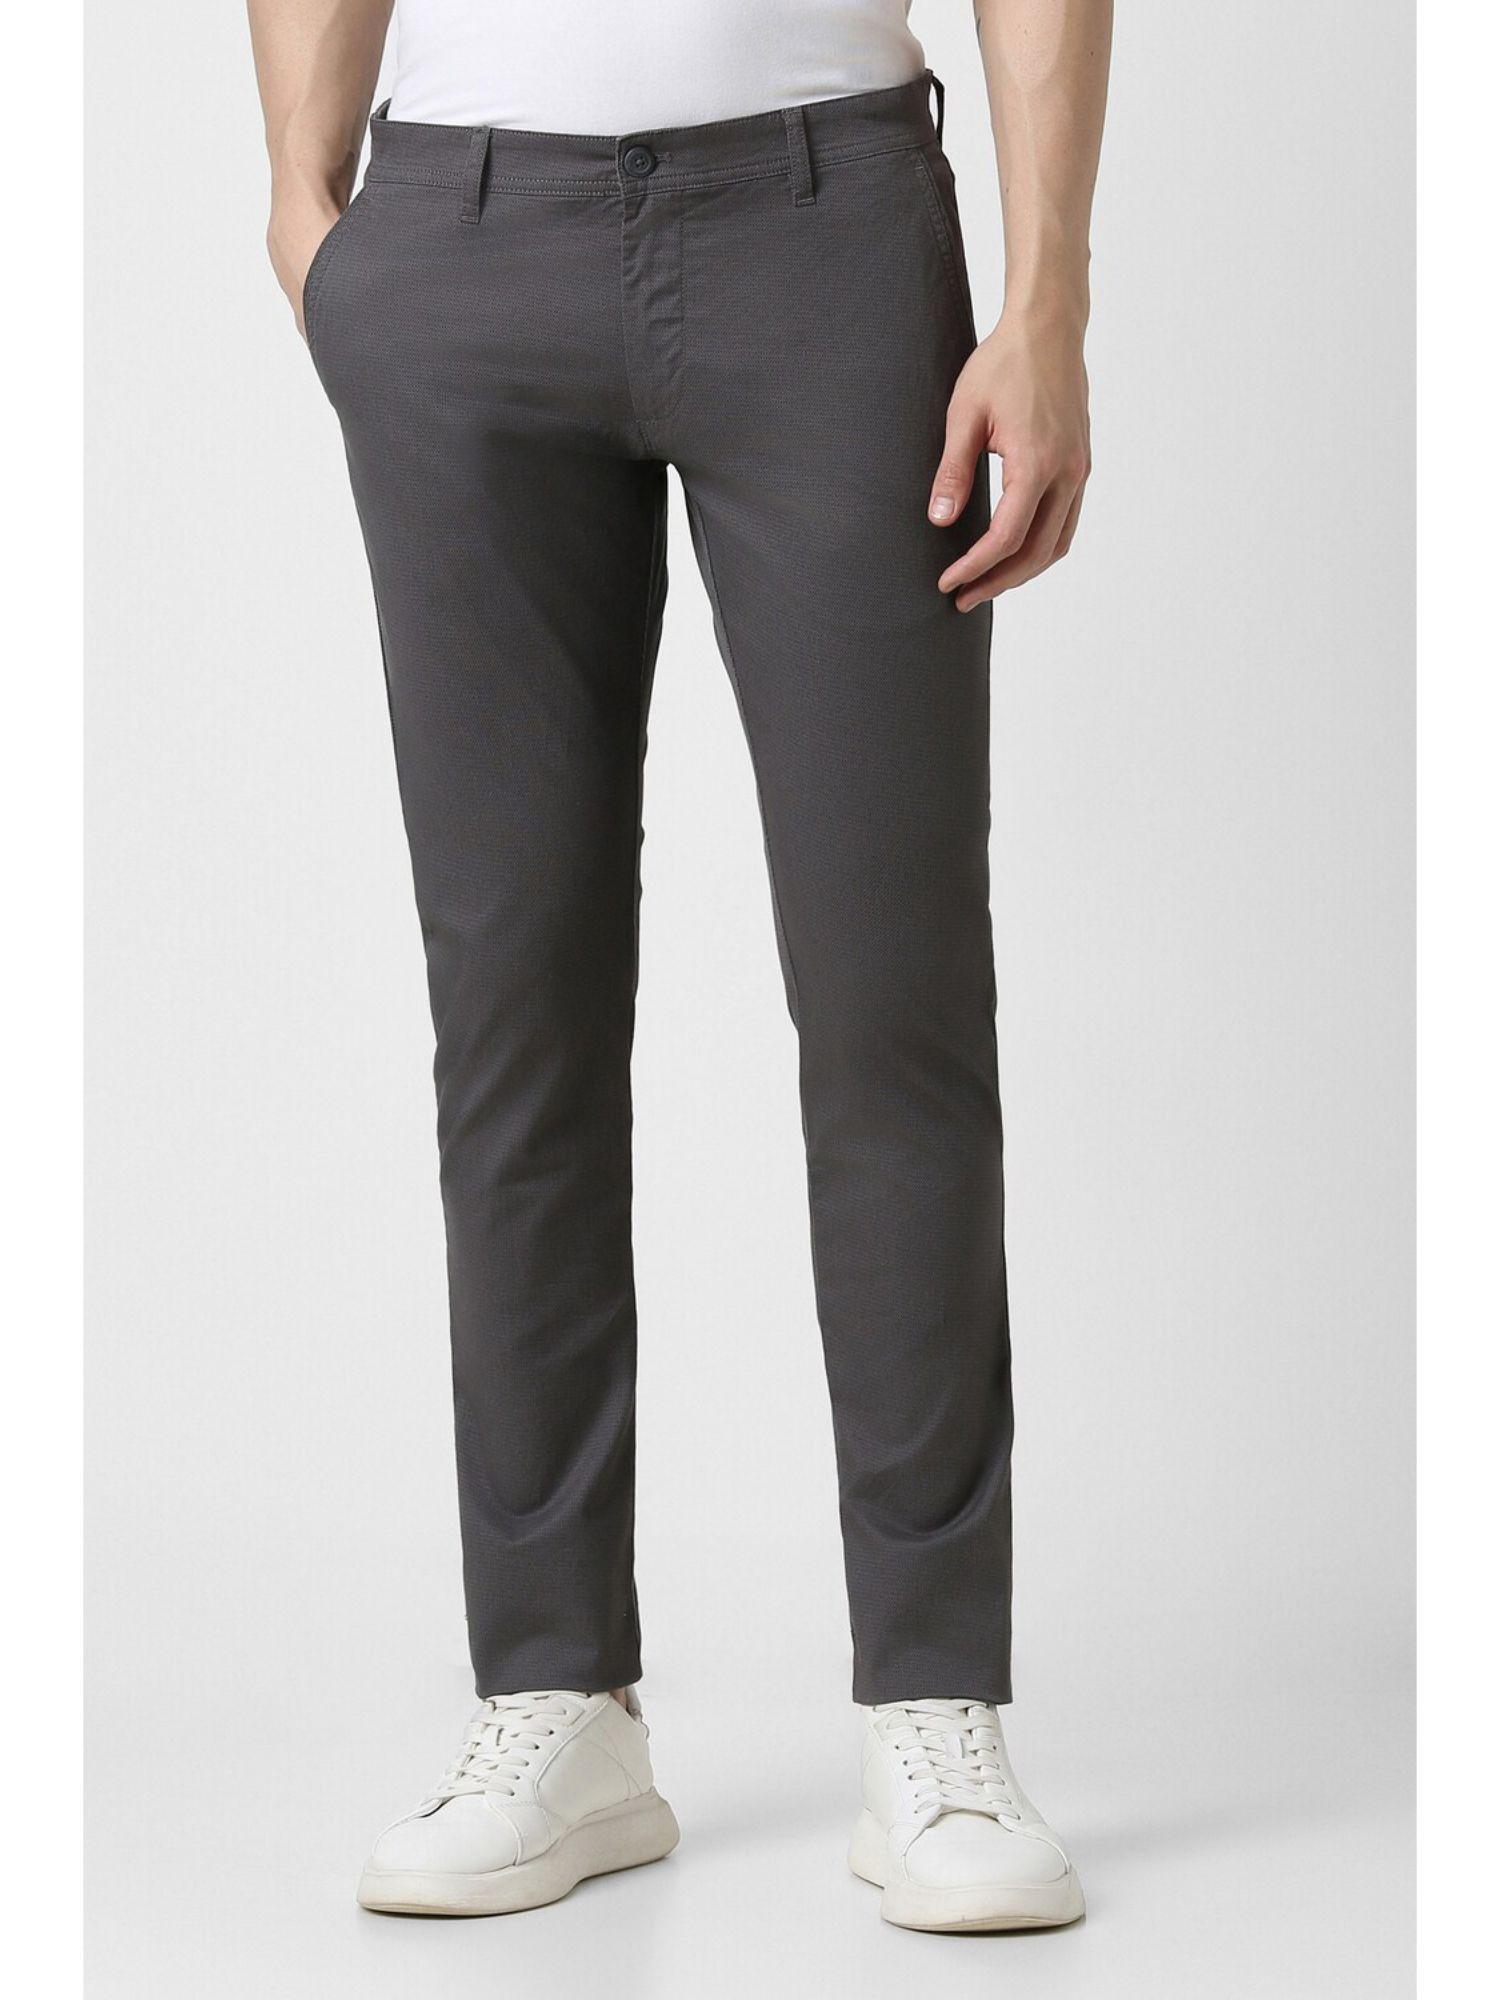 men-grey-textured-low-skinny-fit-casual-trousers